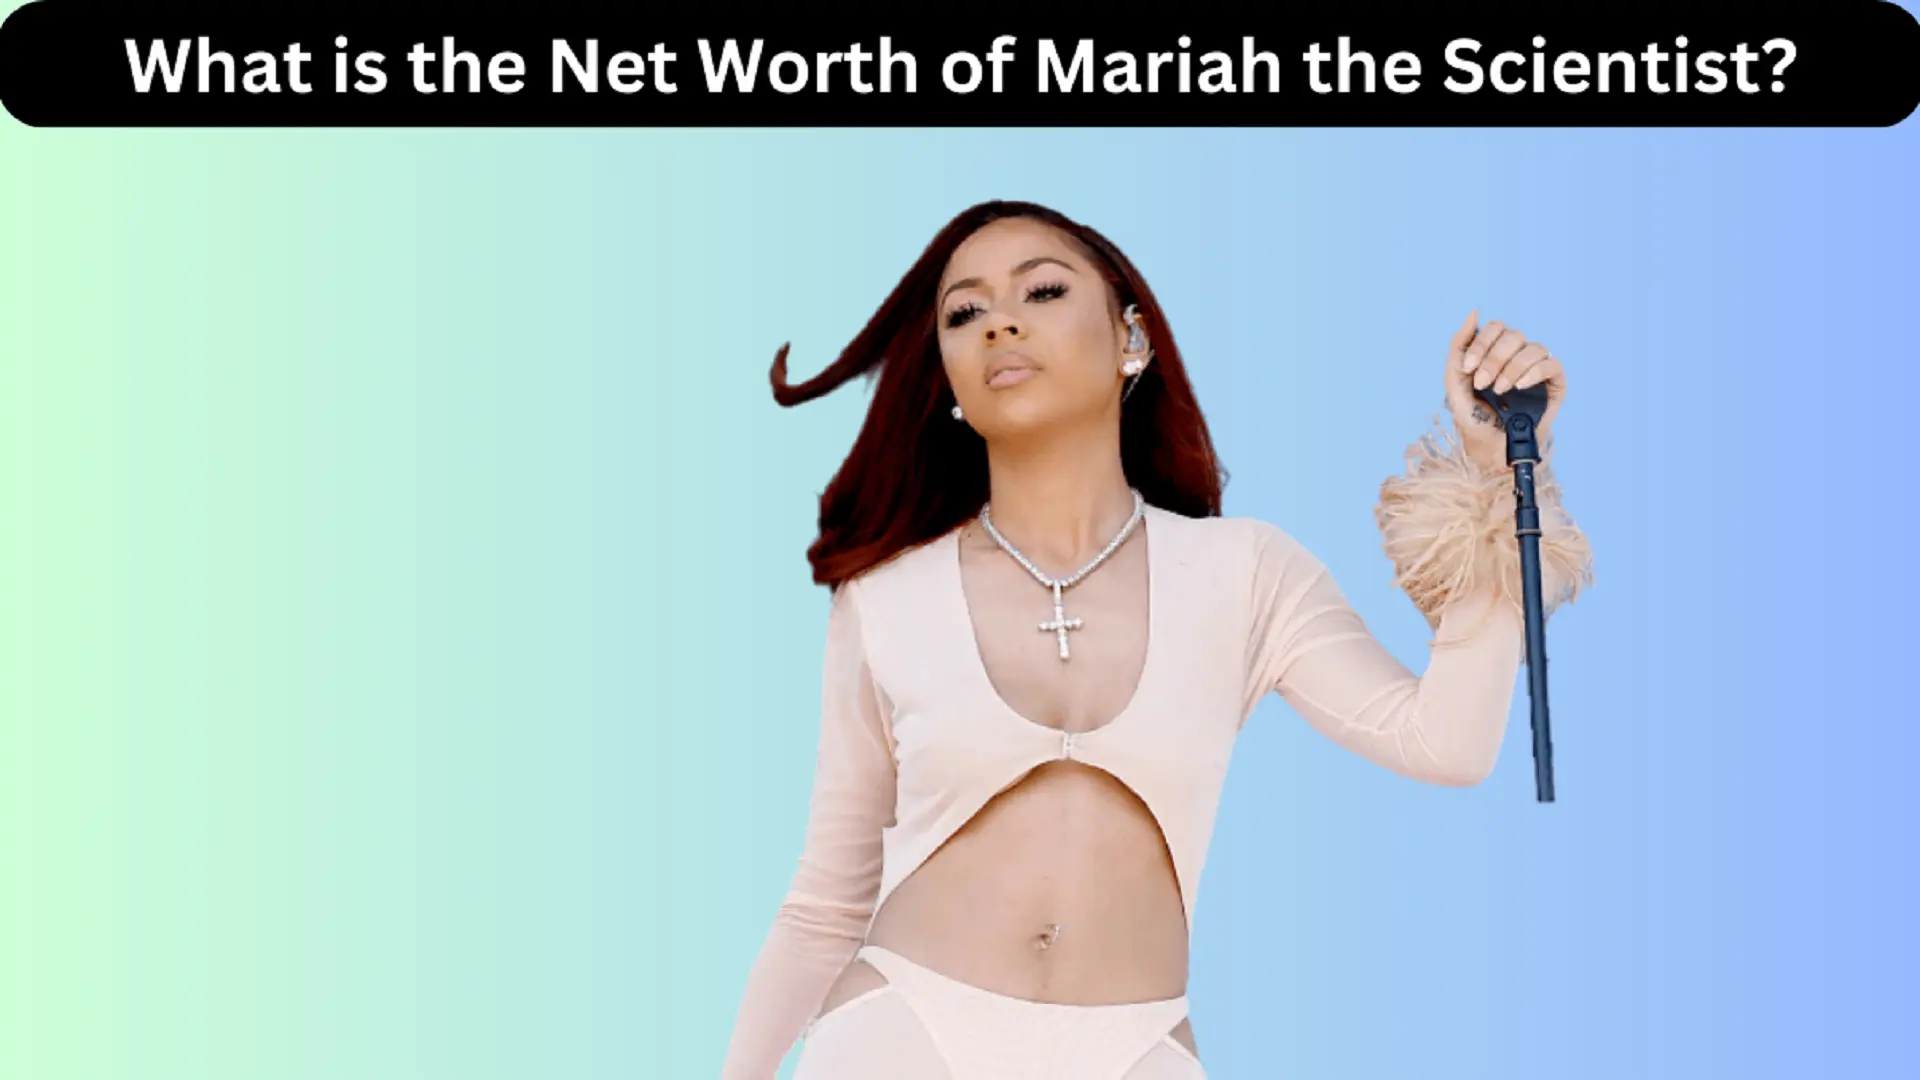 What is the Net Worth of Mariah the Scientist